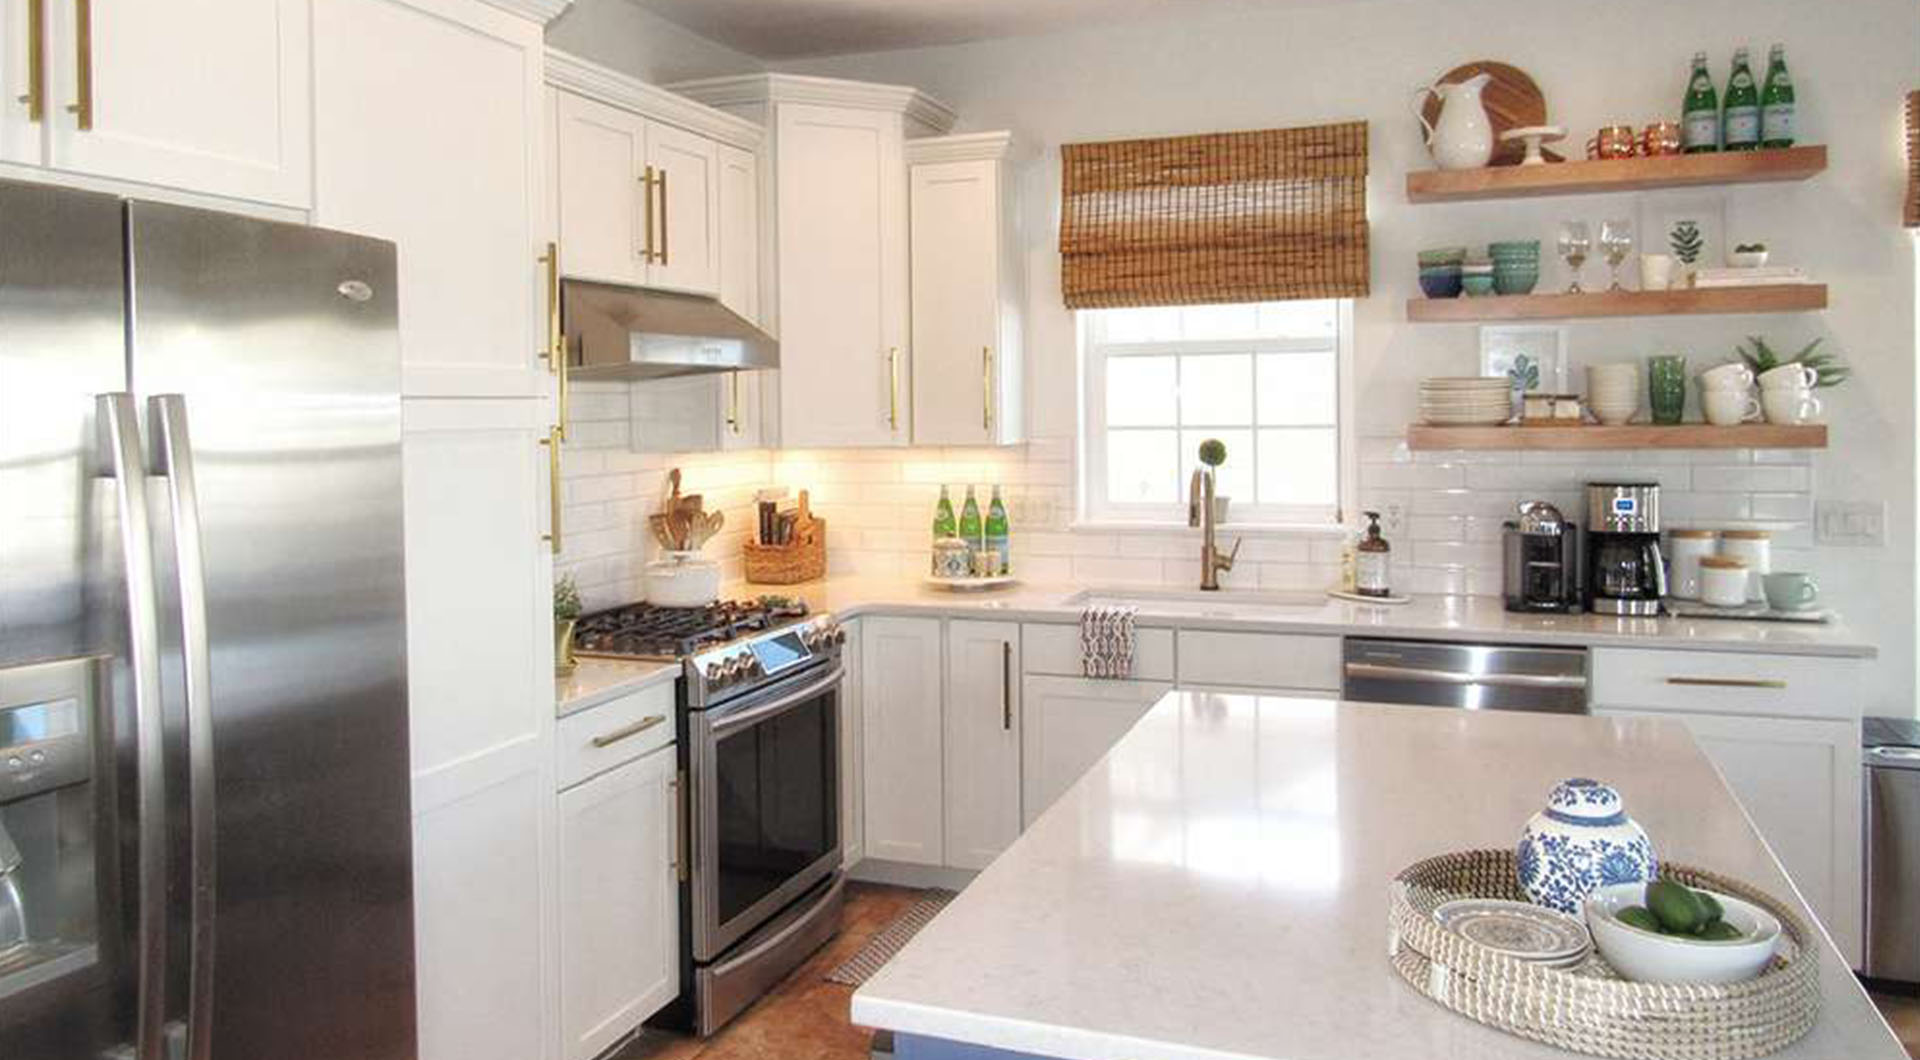 Save Big on Revitalizing Your Cabinets and Walls